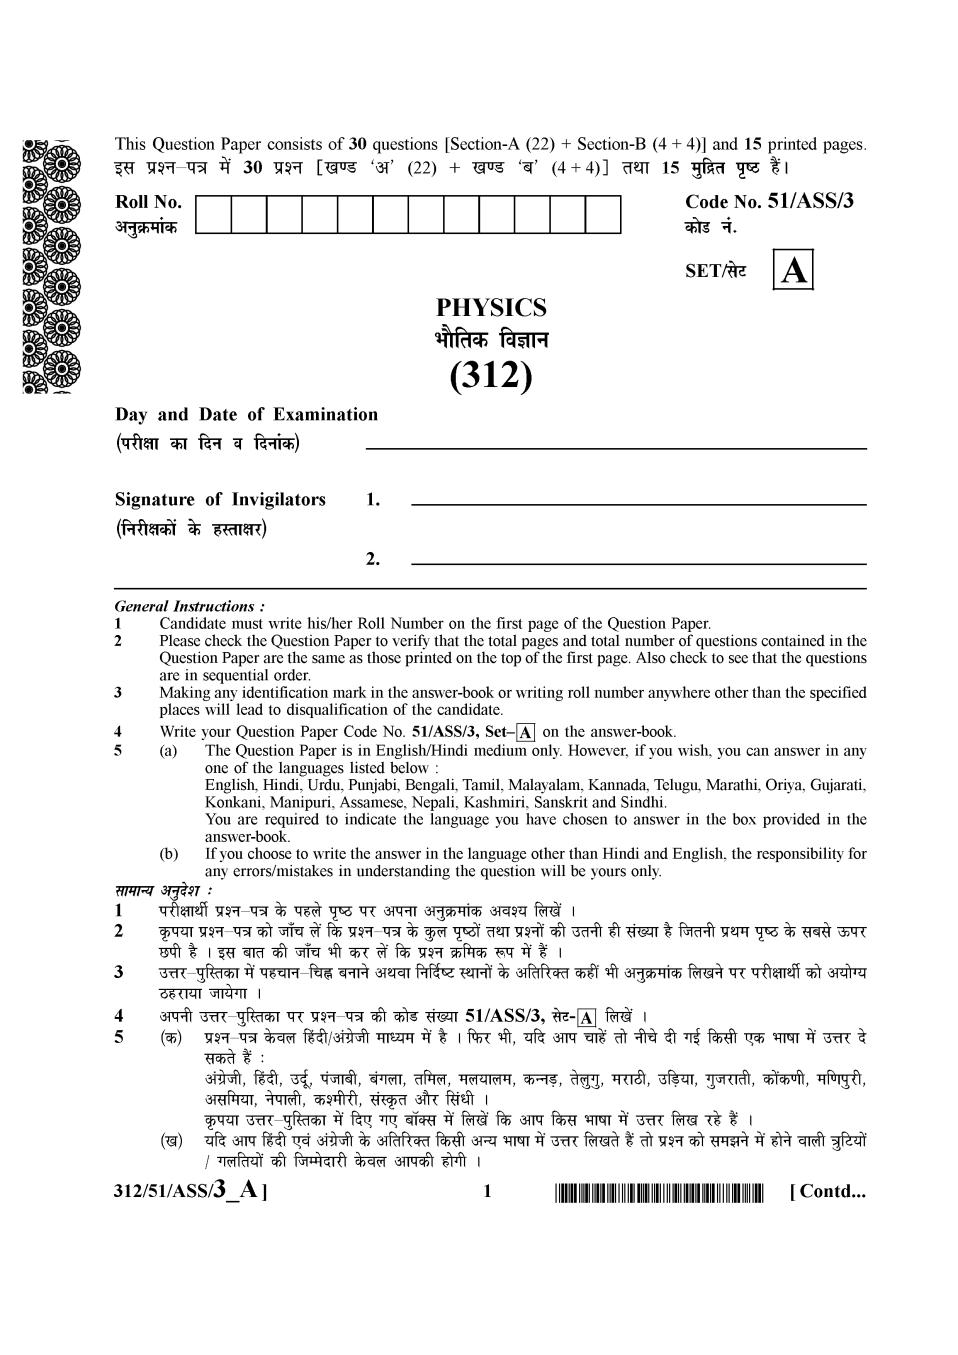 NIOS Class 12 Question Paper Oct 2015 - Physics - Page 1